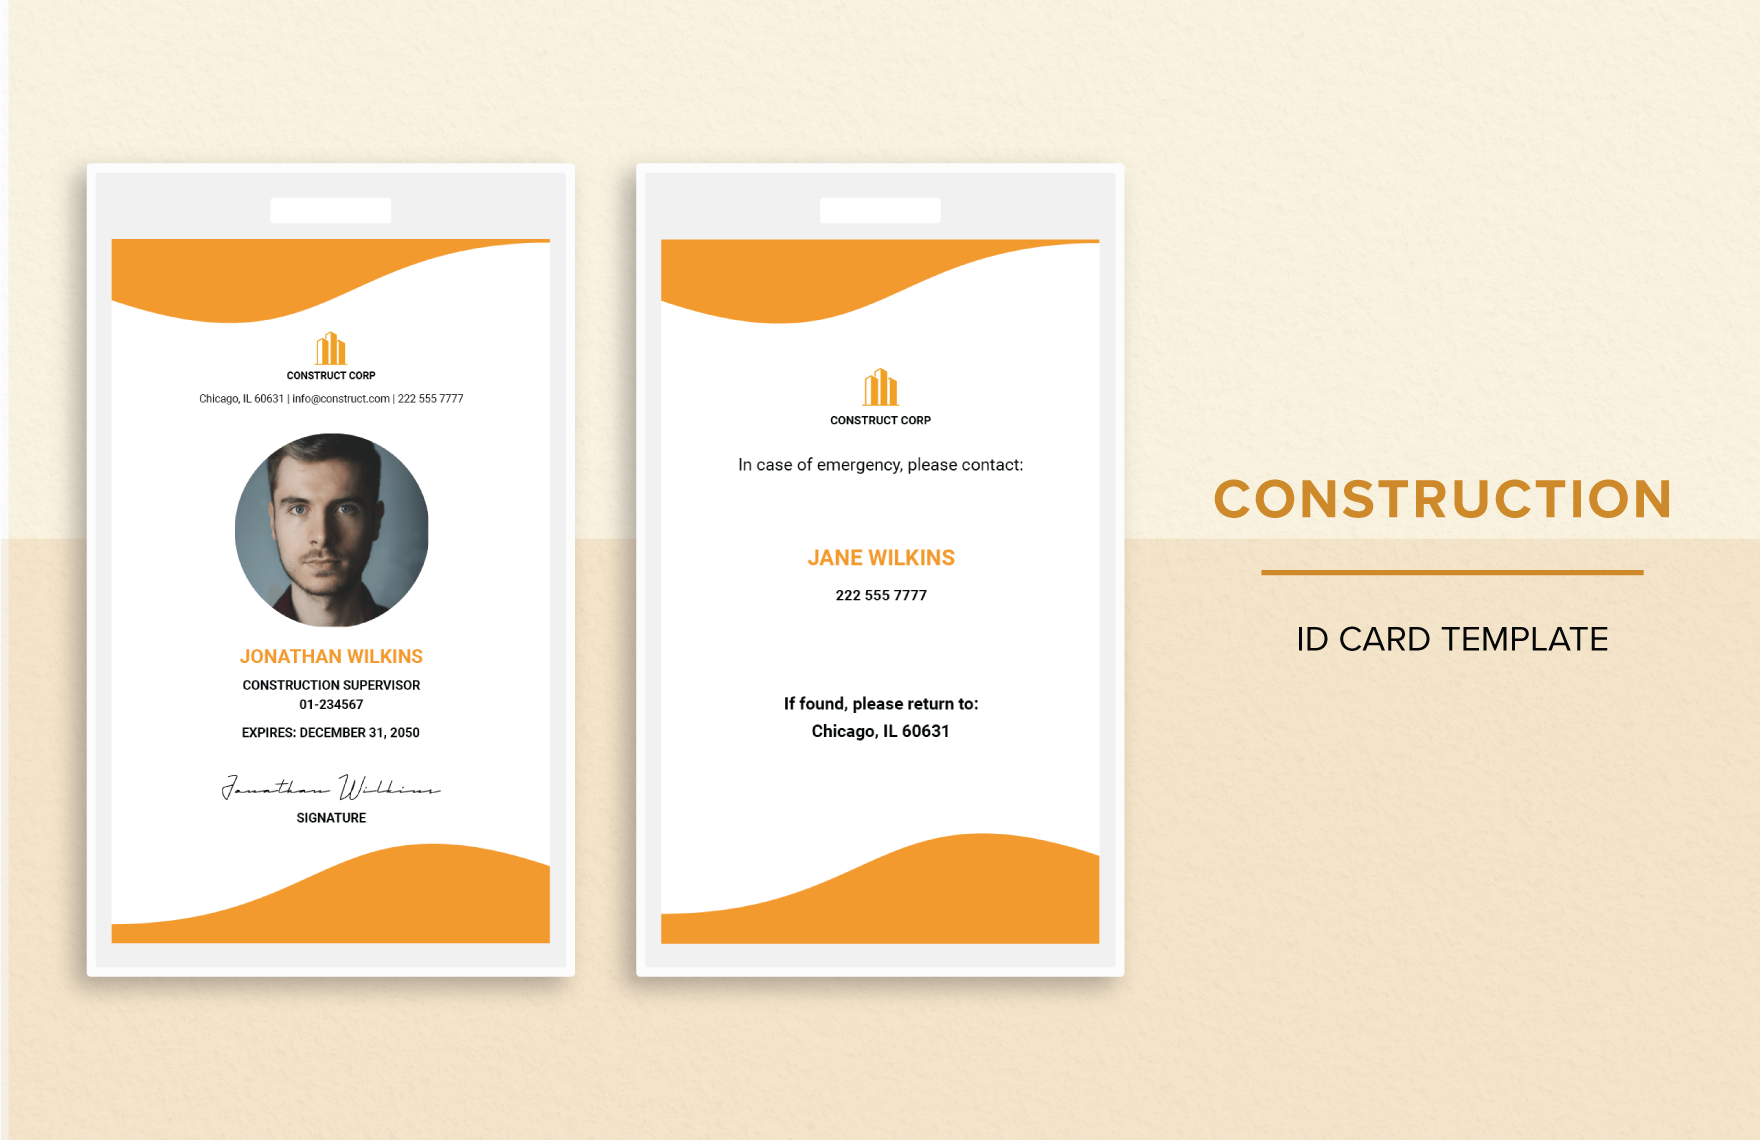 Construction ID Card Template